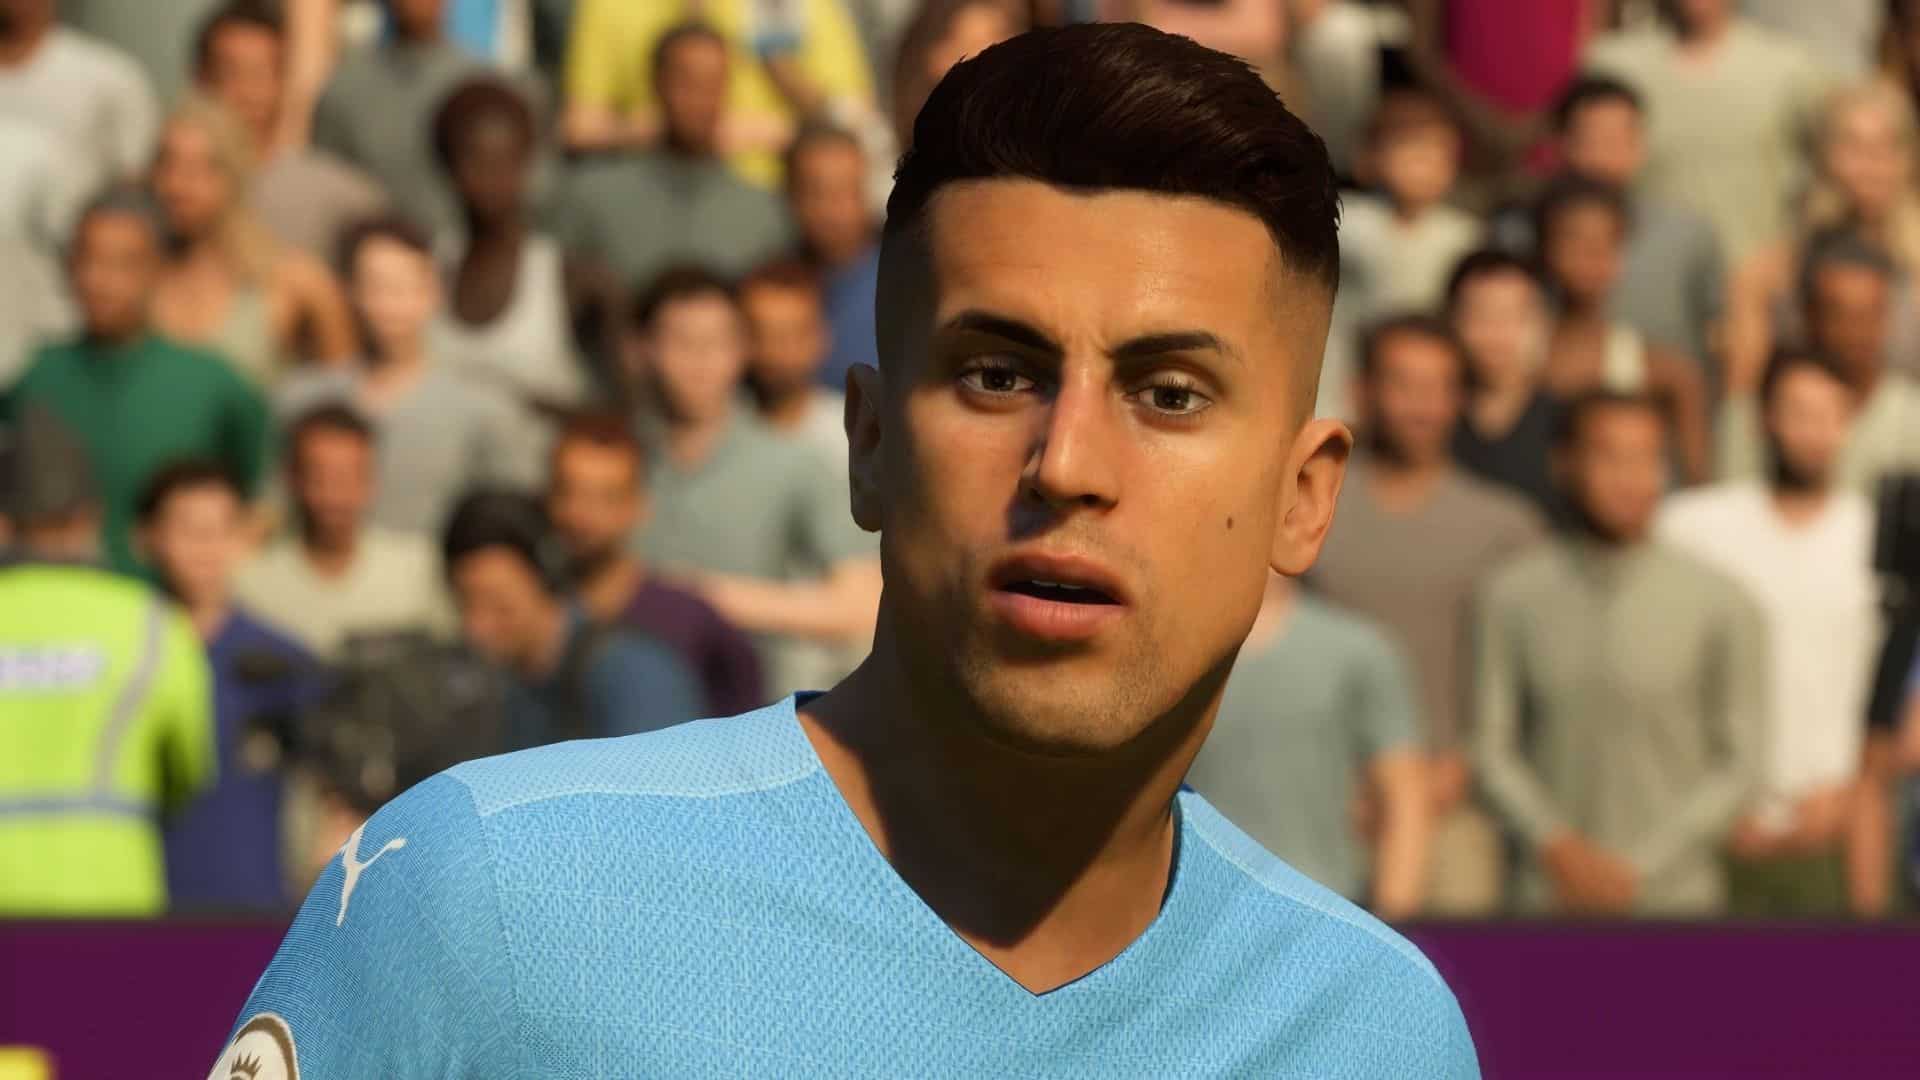 Joao Cancelo face in FIFA 22 with Manchester City kit